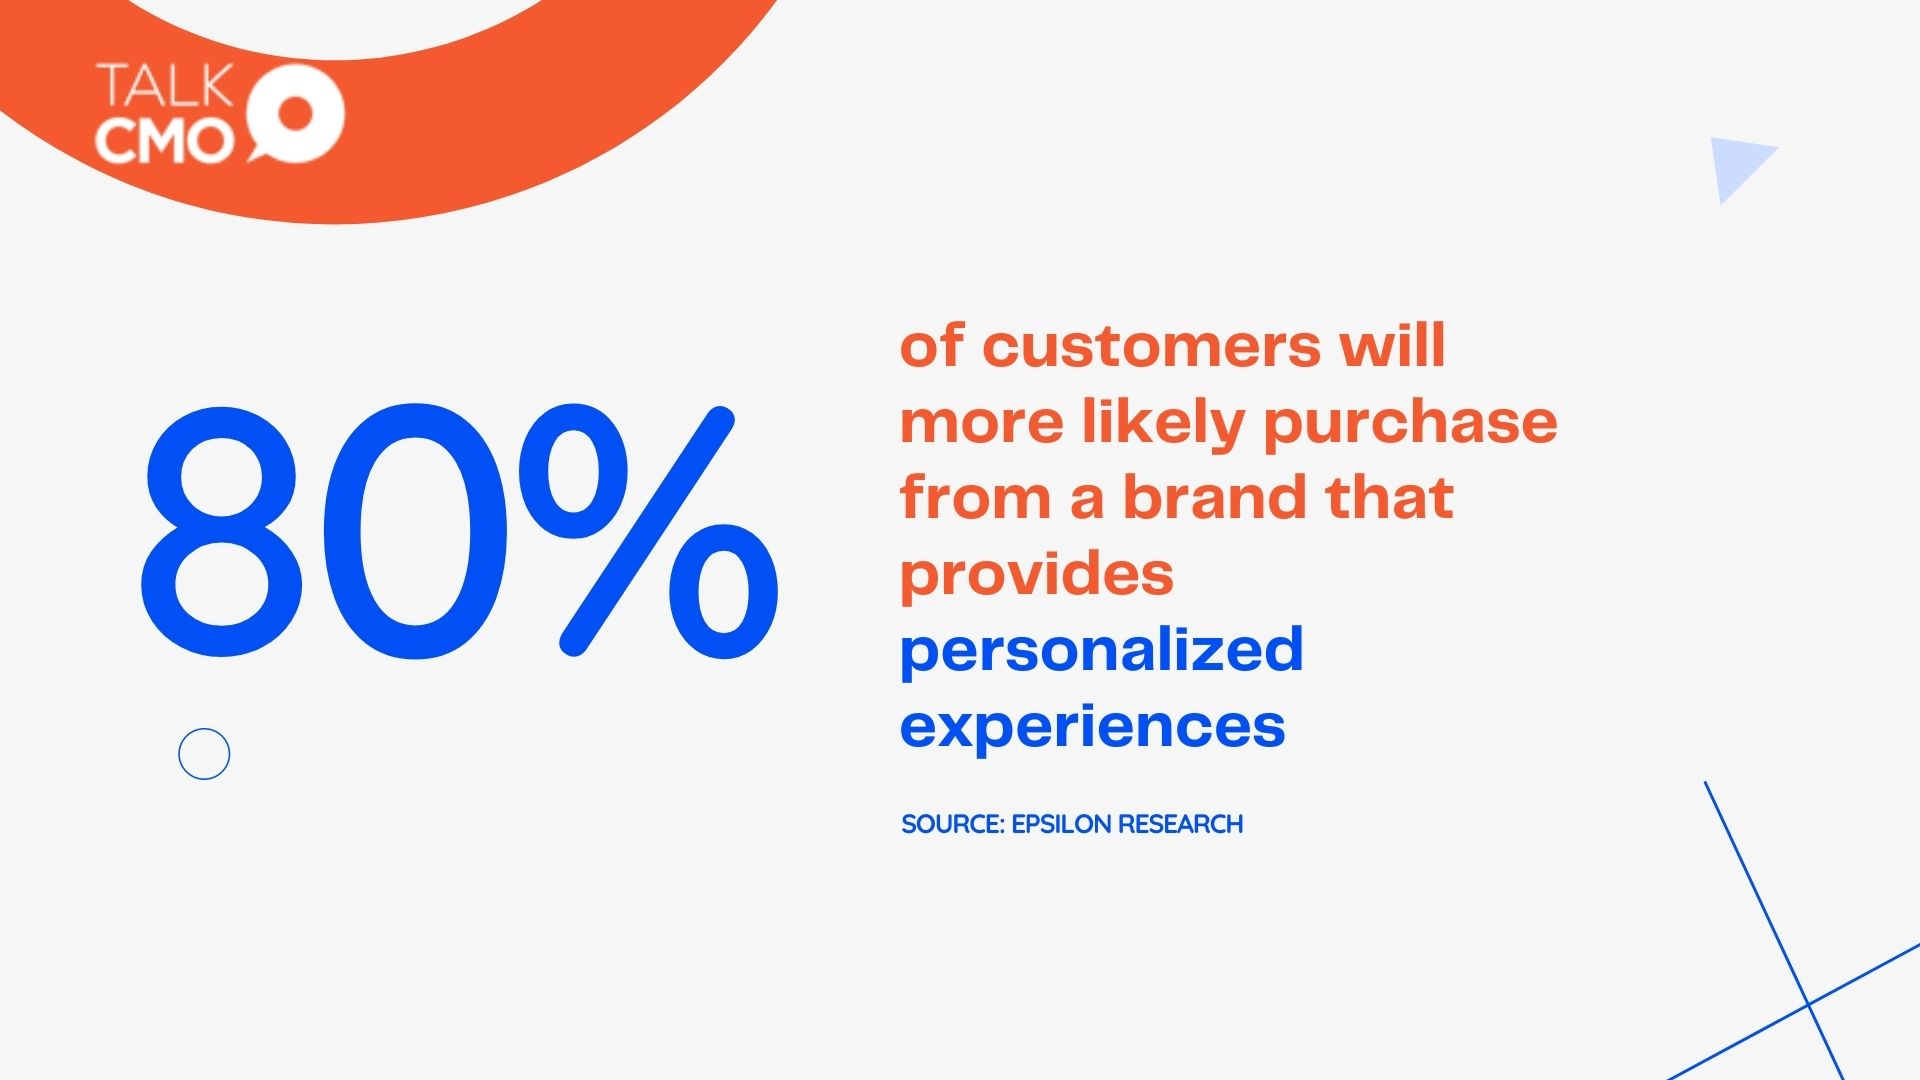 of customers will more likely purchase from a brand that provides personalized experiences